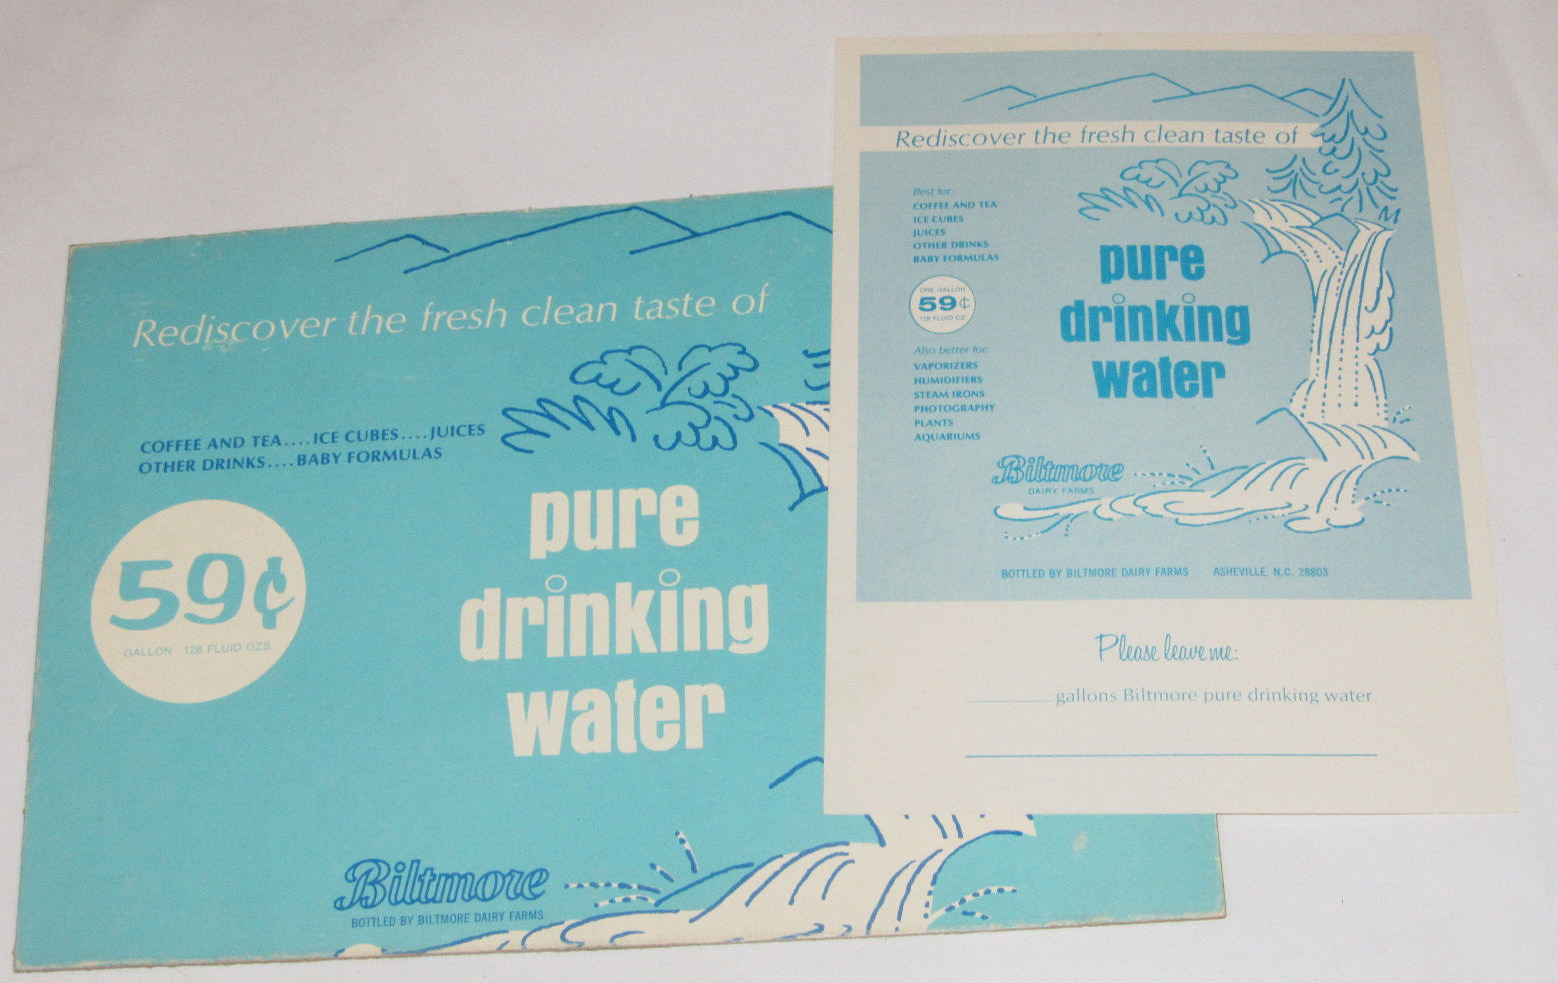 VTG 1970s BILTMORE DAIRY FARMS \'PURE DRINKING WATER\' ADVERTISING SIGN/ORDER FORM